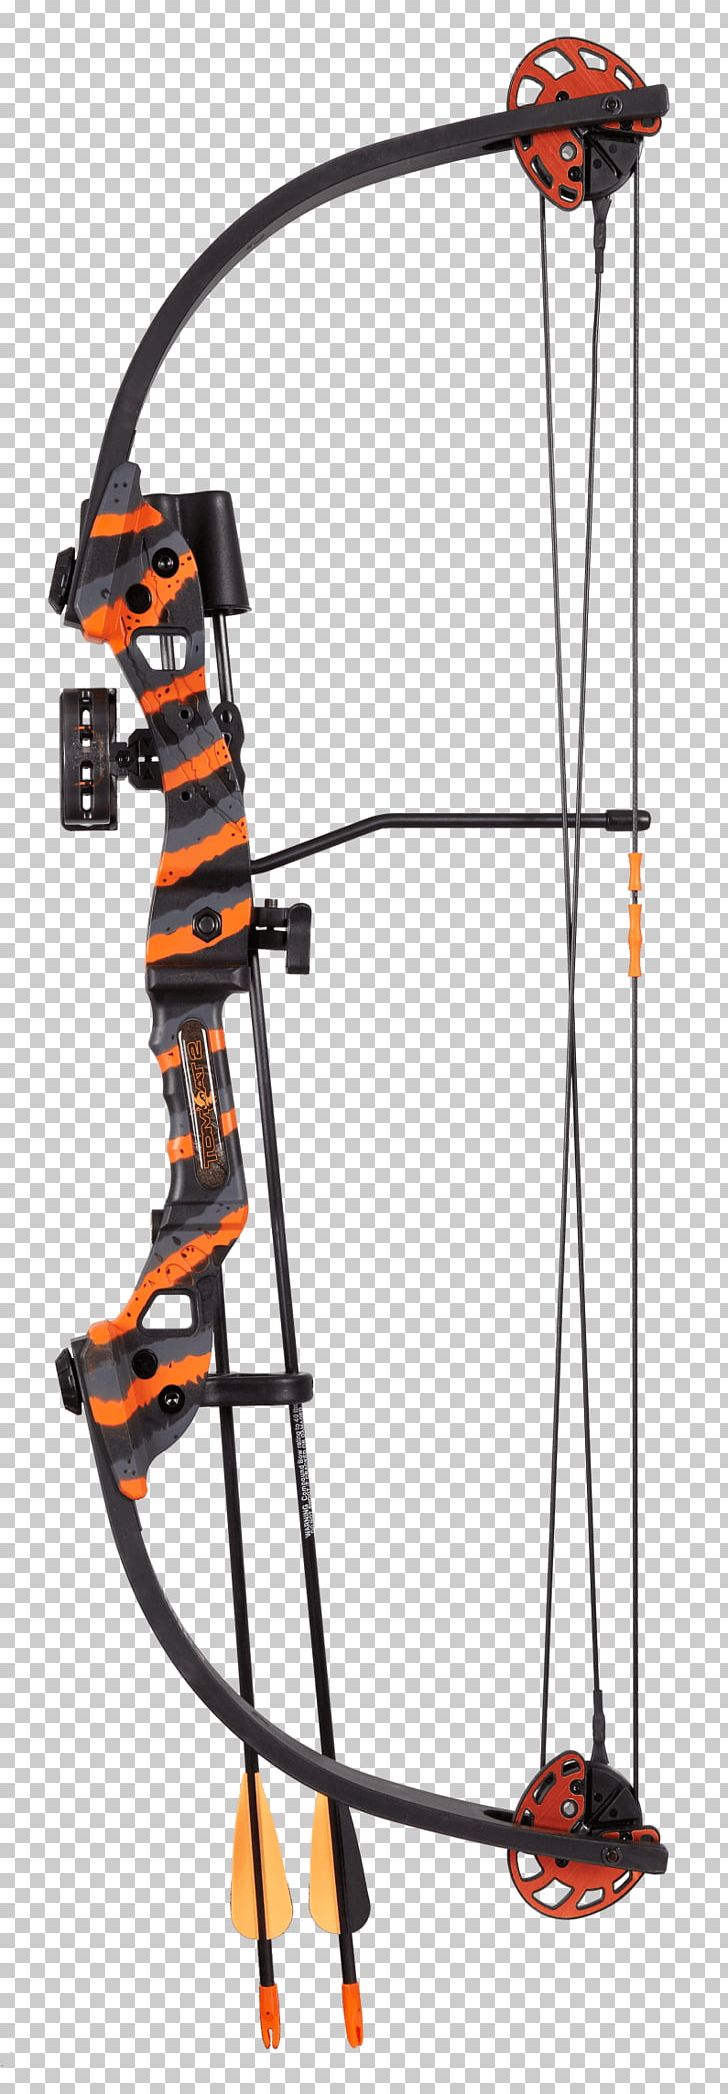 Compound Bows Bow And Arrow Archery Green Arrow PNG, Clipart, Archery, Arrow, Bear Archery, Black Cat, Bow Free PNG Download